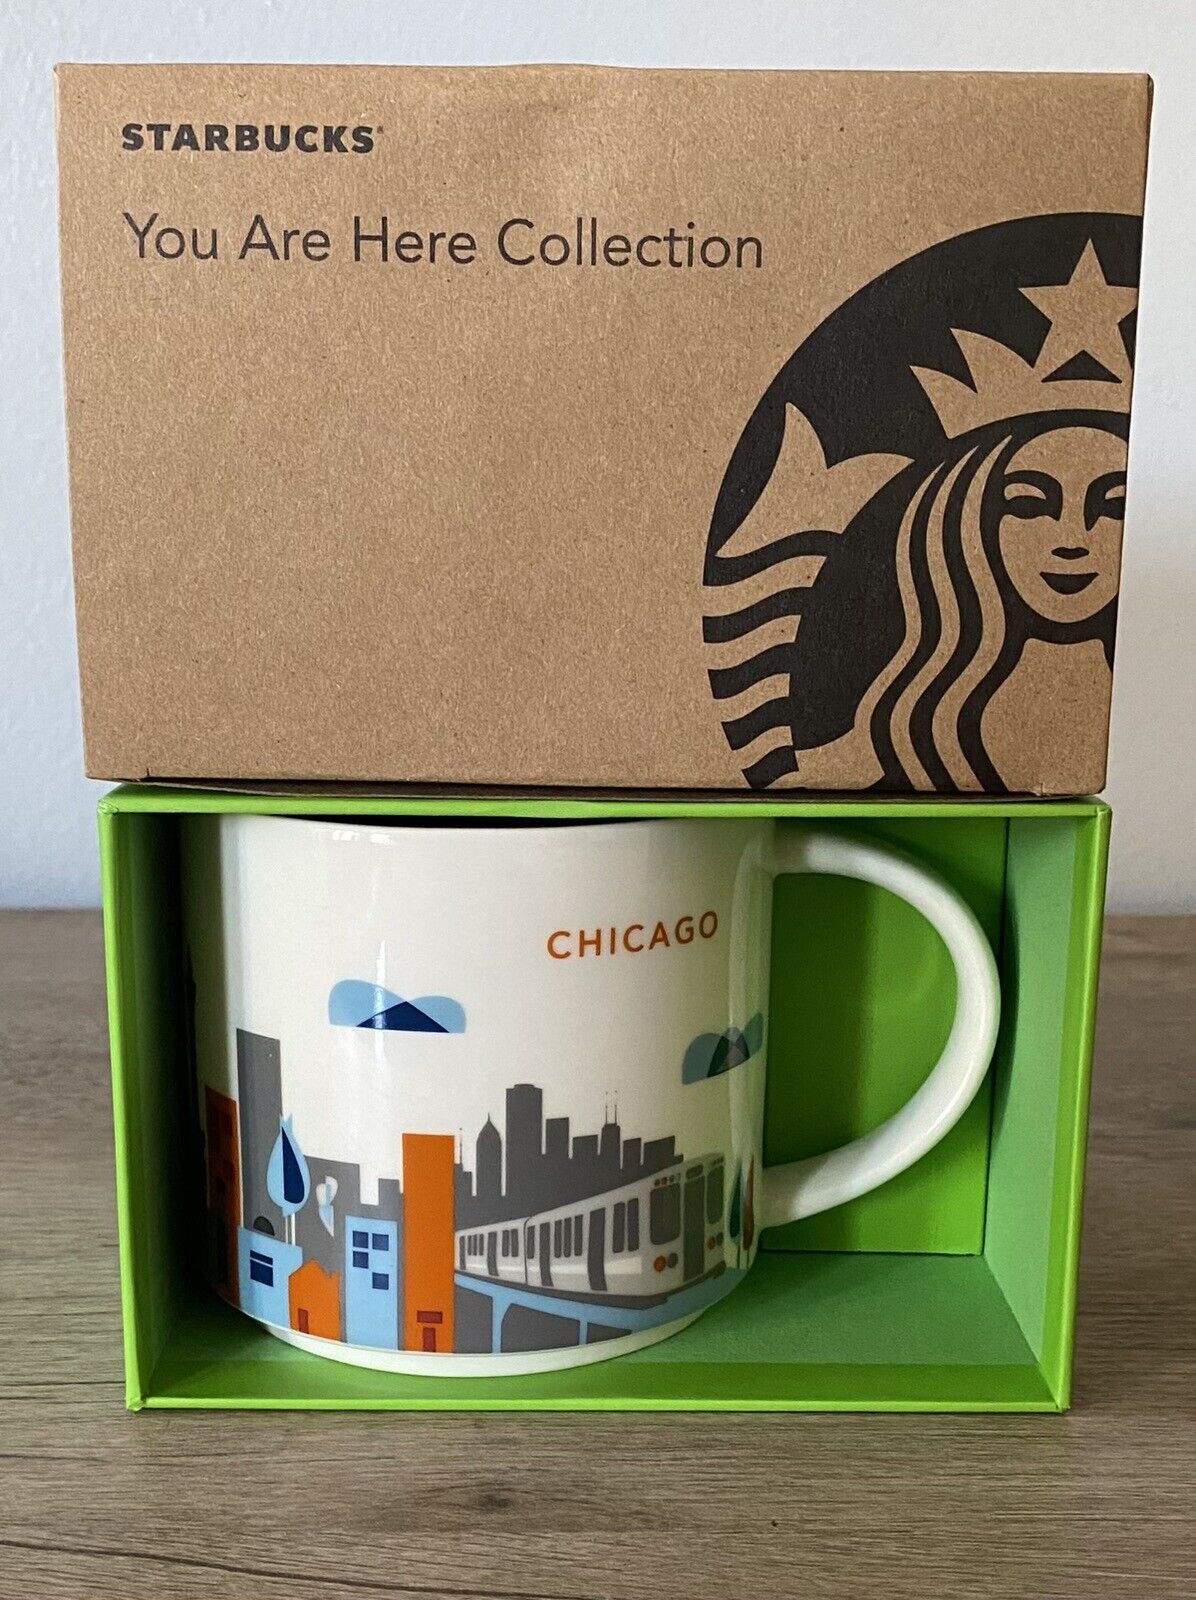 2015 Starbucks You Are Here Collection Chicago Coffee Mug Cup In Box